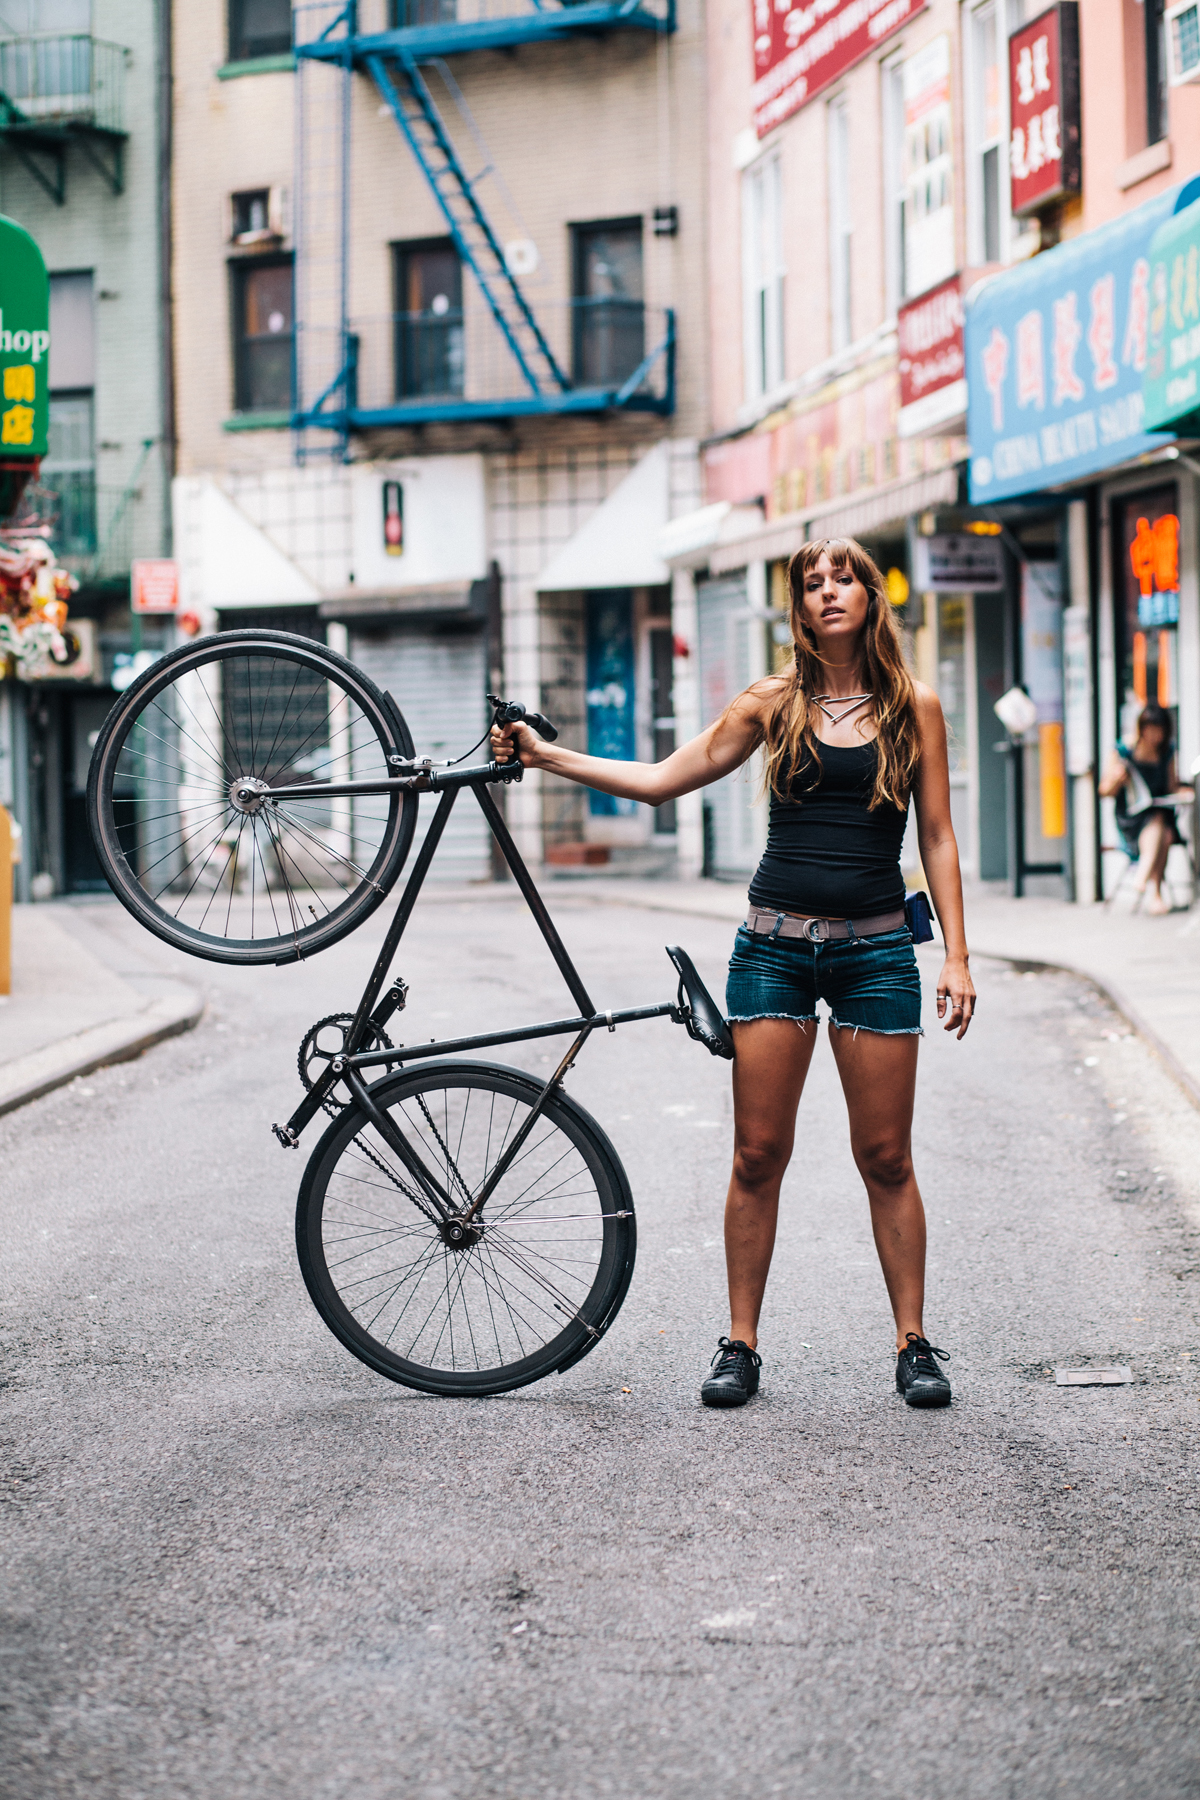 Preferred Mode: Photos of New York City's Bike Culture at Its Best